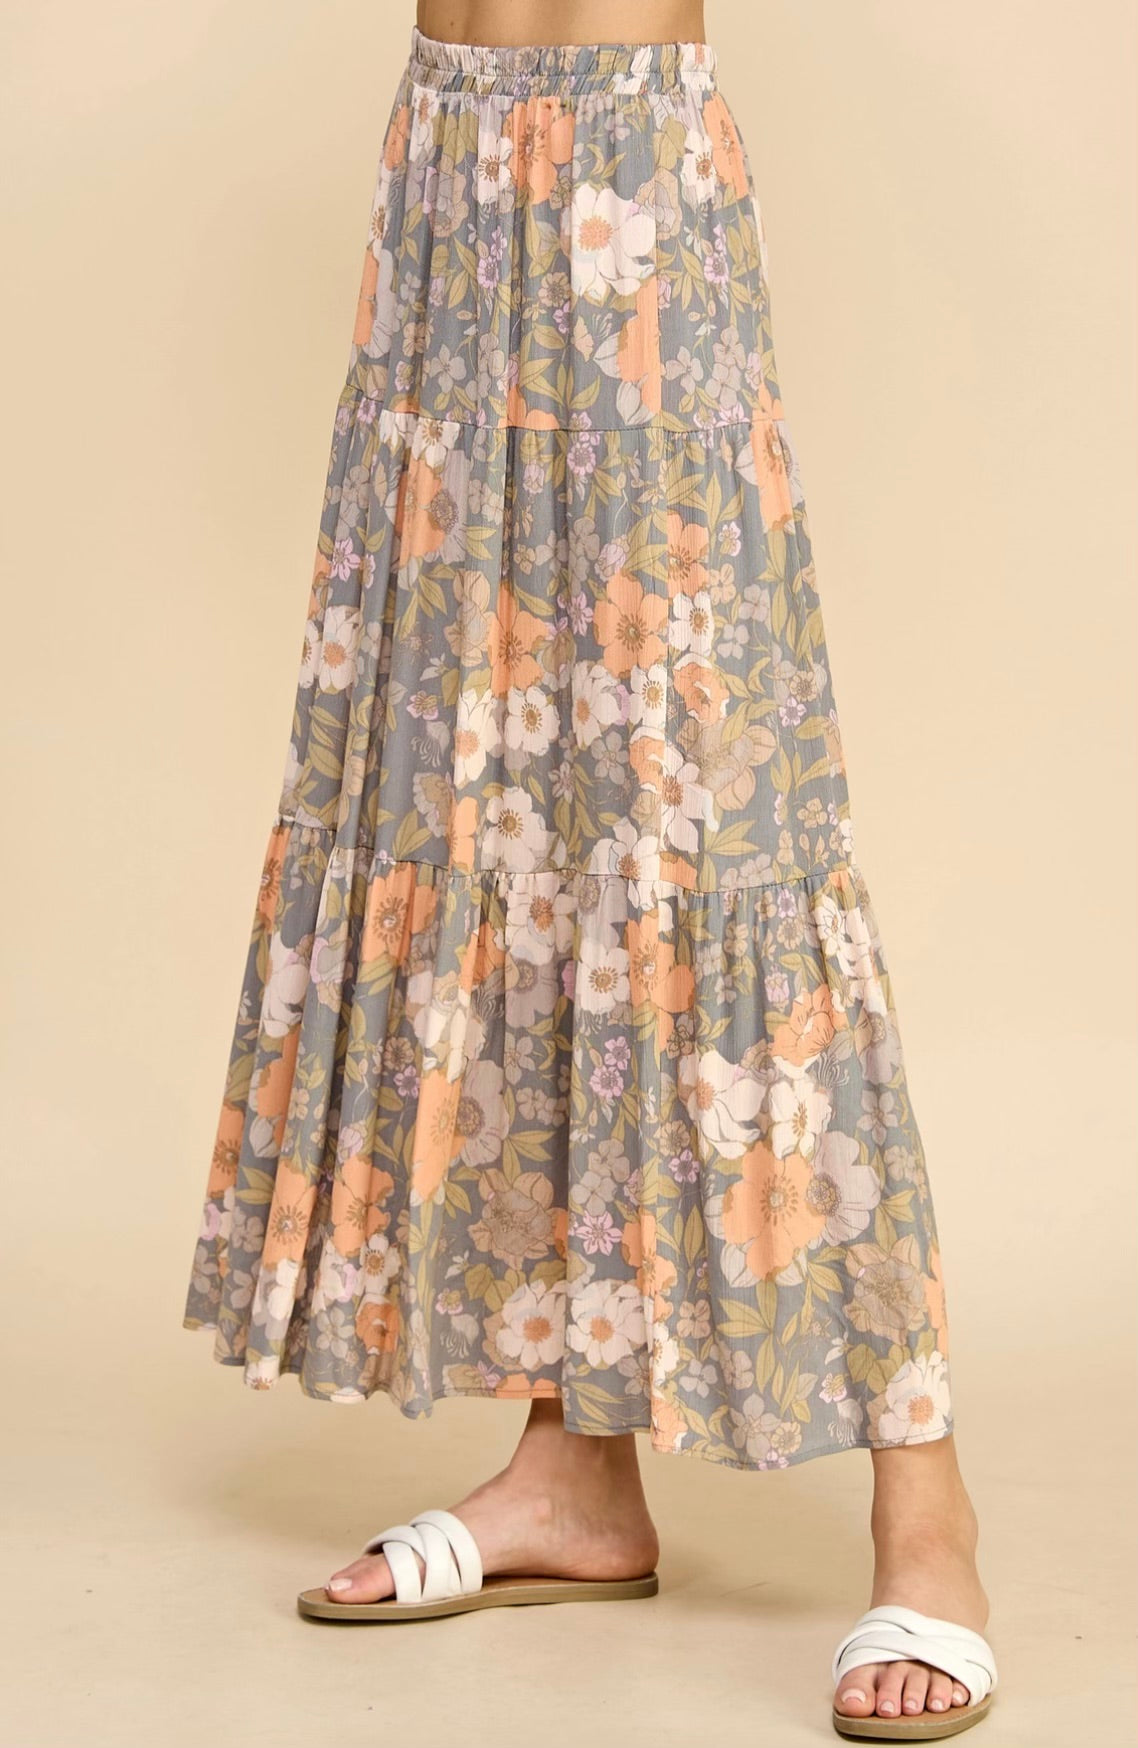 Three Layer Floral Skirt